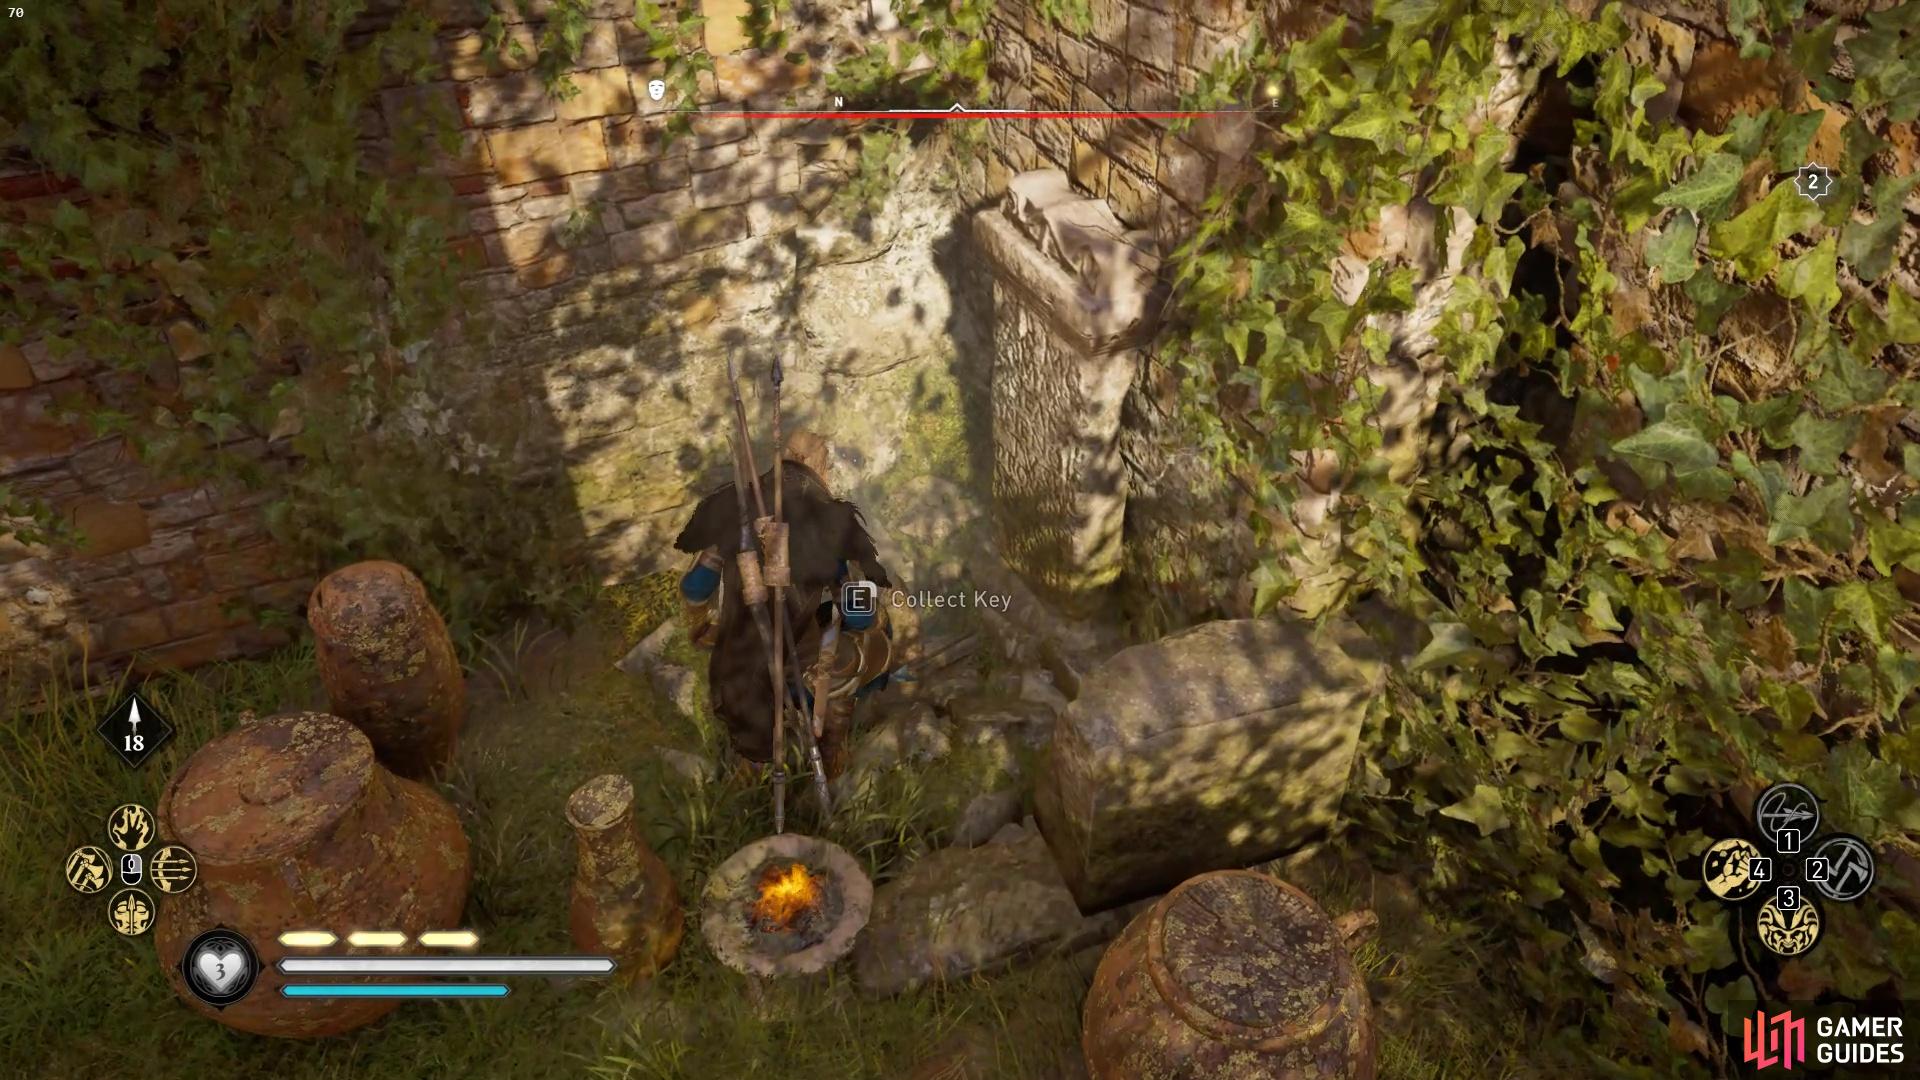 to get to the artifact you'll need to find the key hidden beneath a rock.